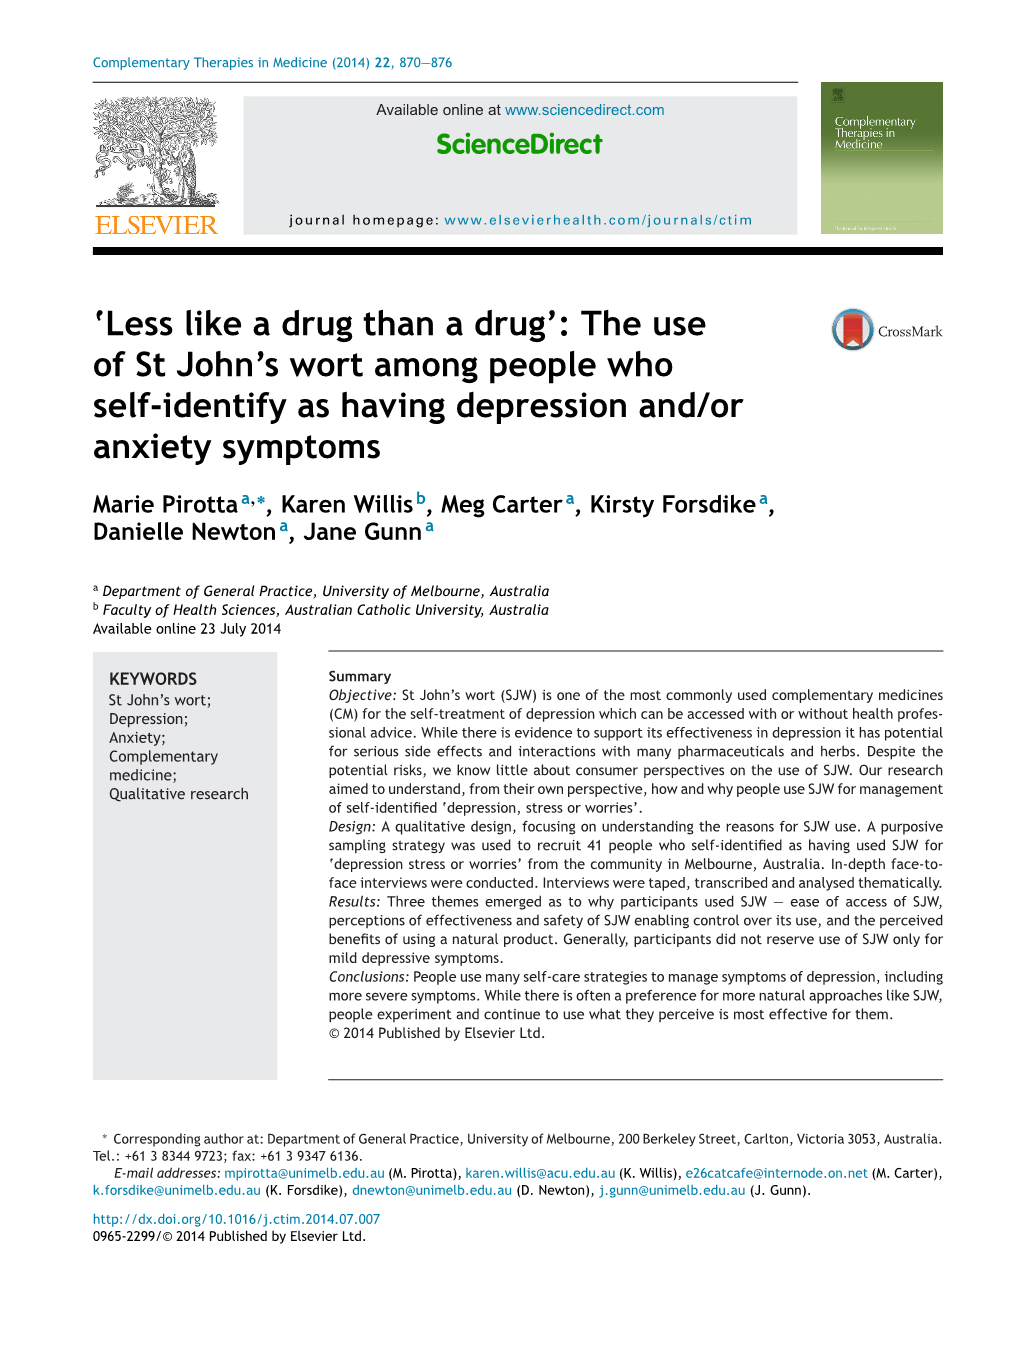 The Use of St John's Wort Among People Who Self-Identify As Having Depression And/Or